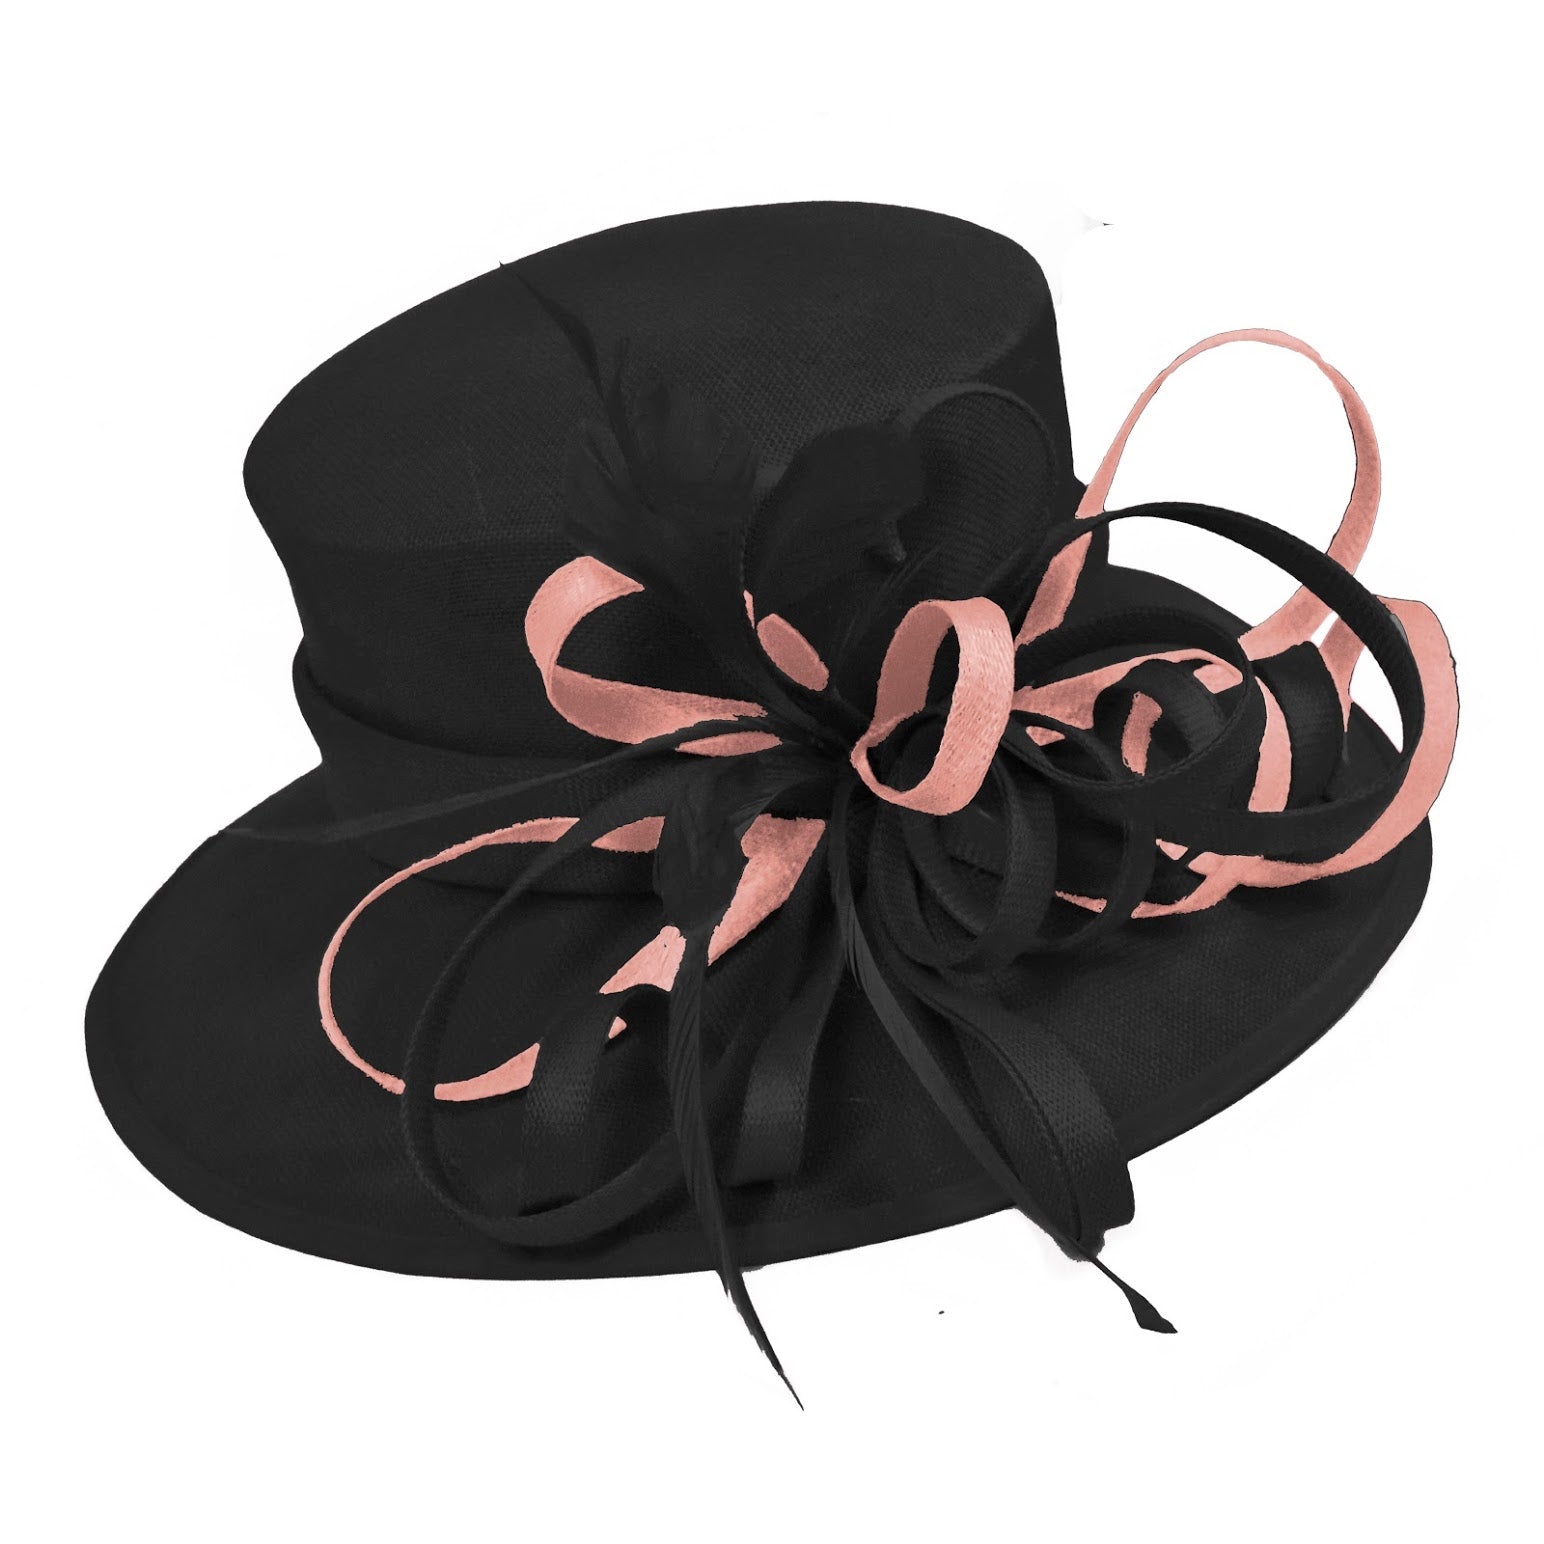 Black and Dusty Pink Large Queen Brim Hat Occasion Hatinator Fascinator Weddings Formal